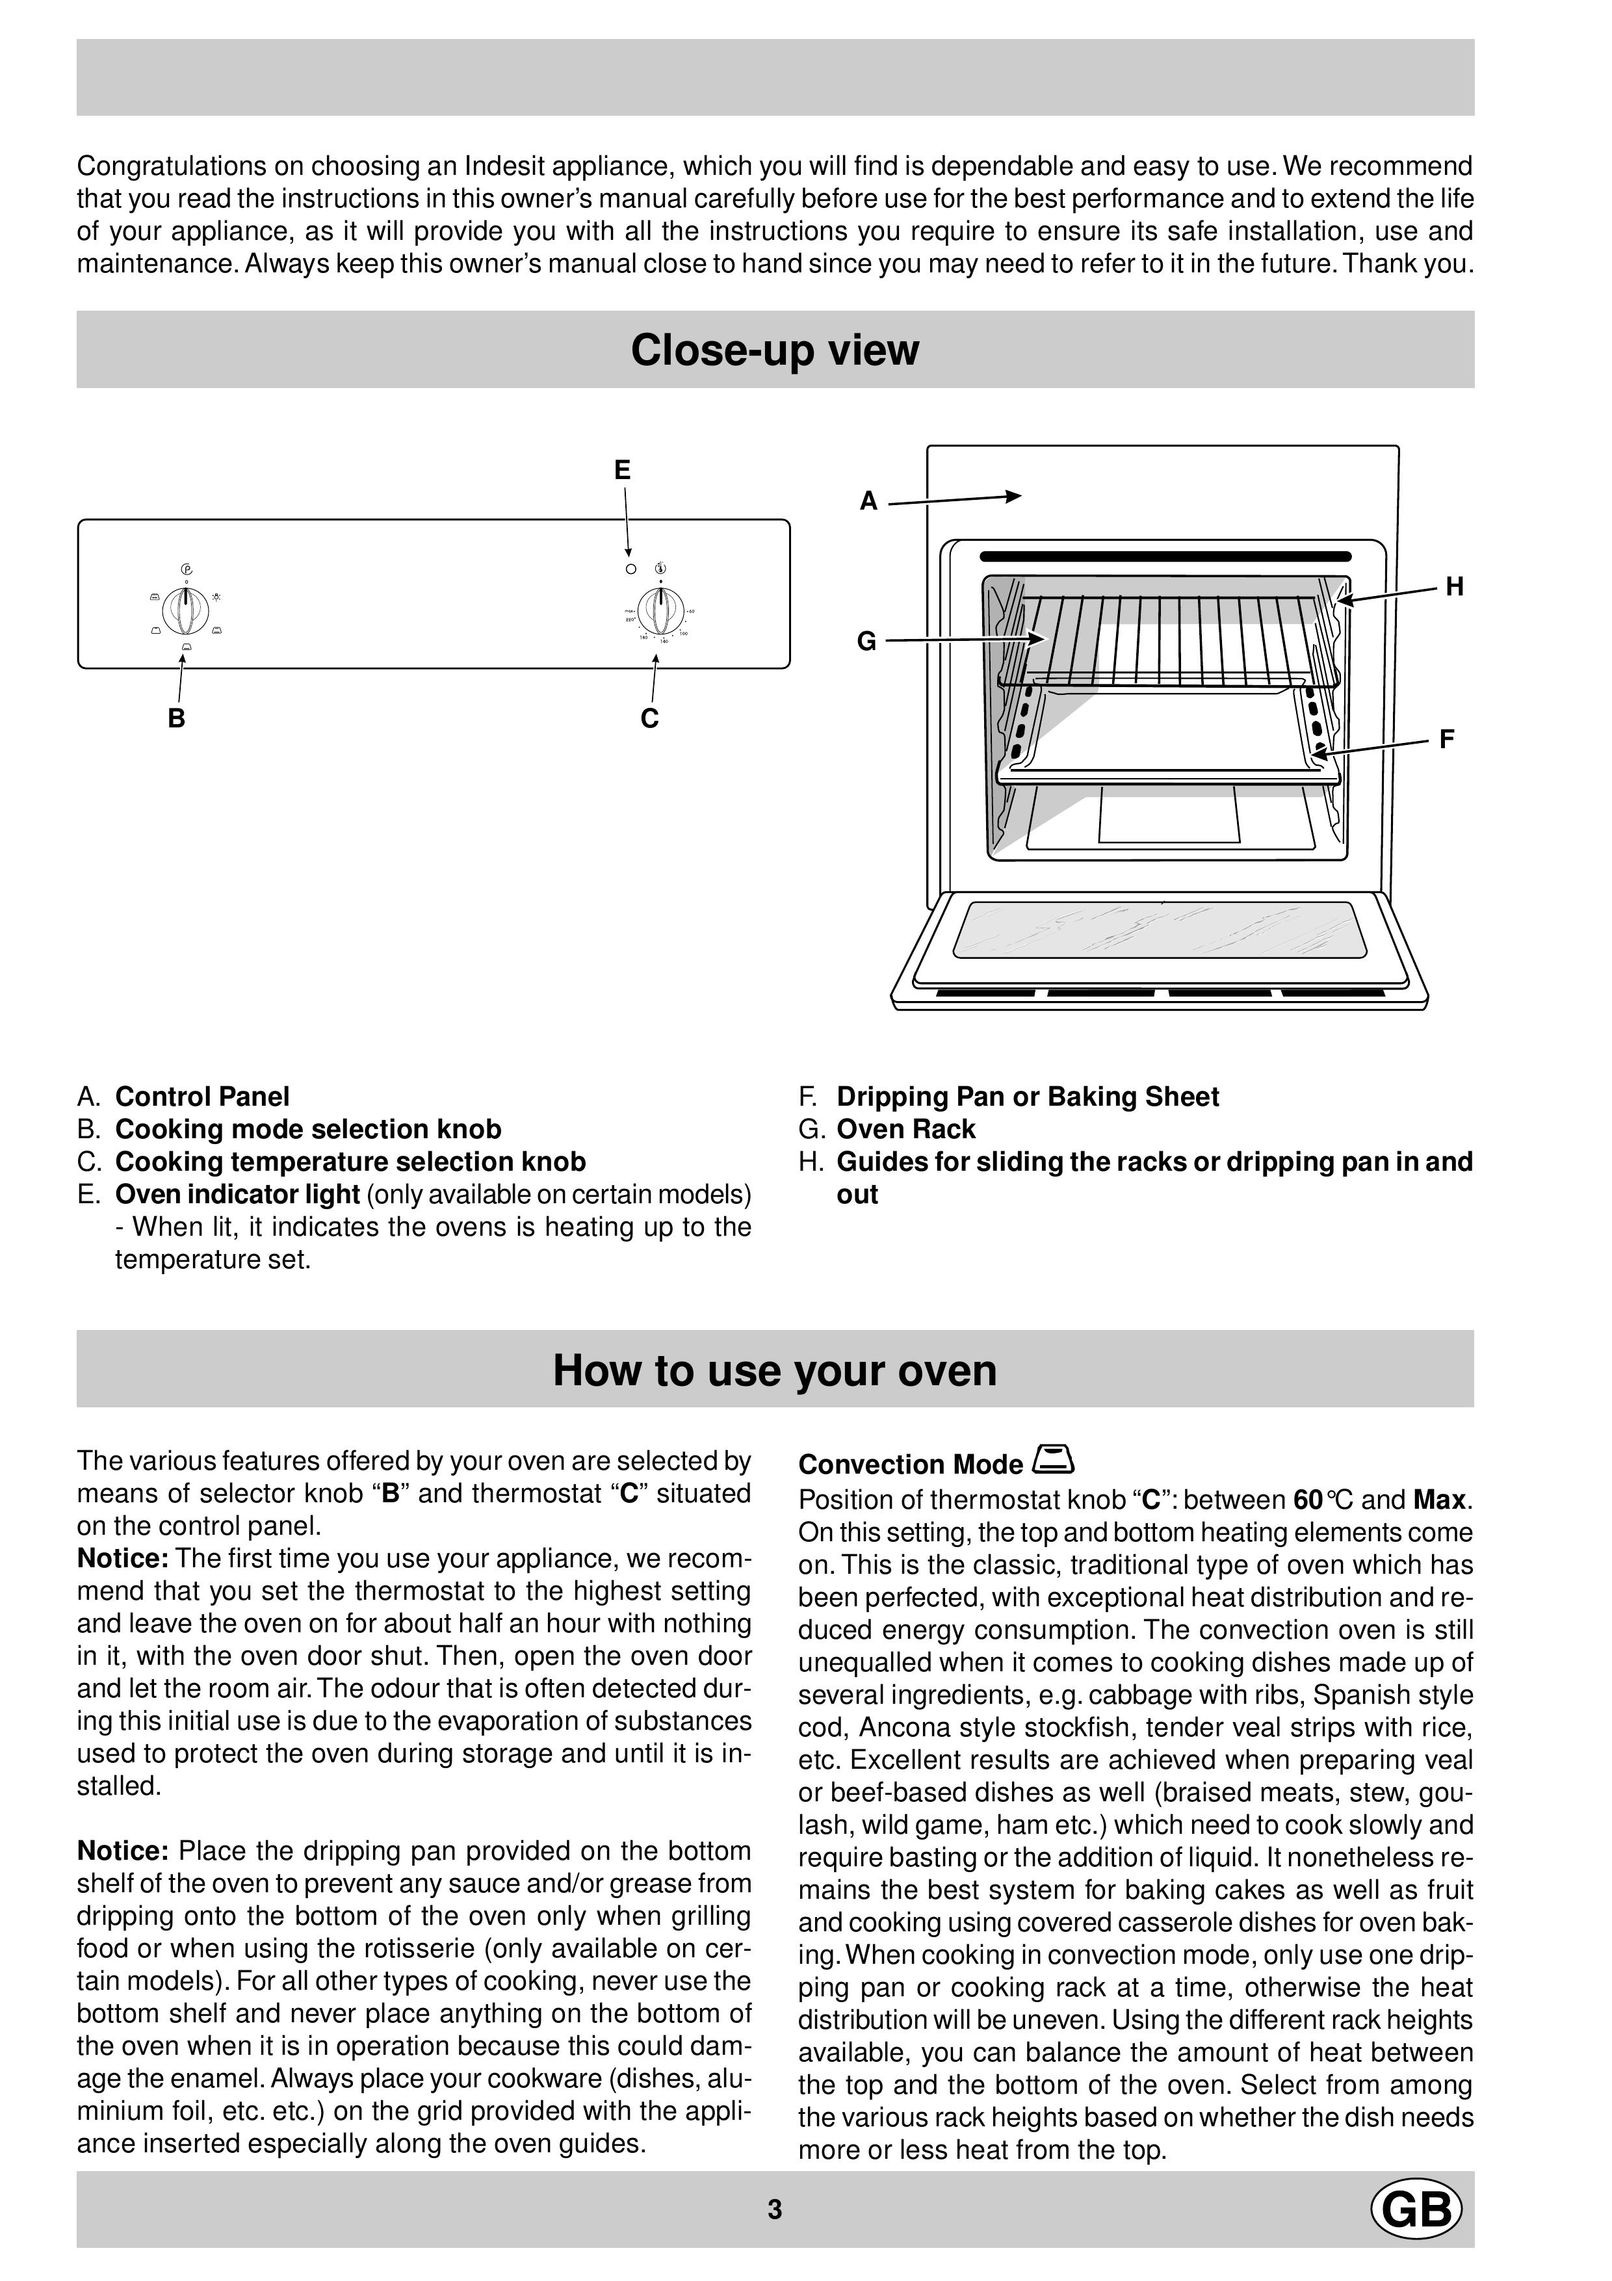 Indesit FE10KC Convection Oven User Manual